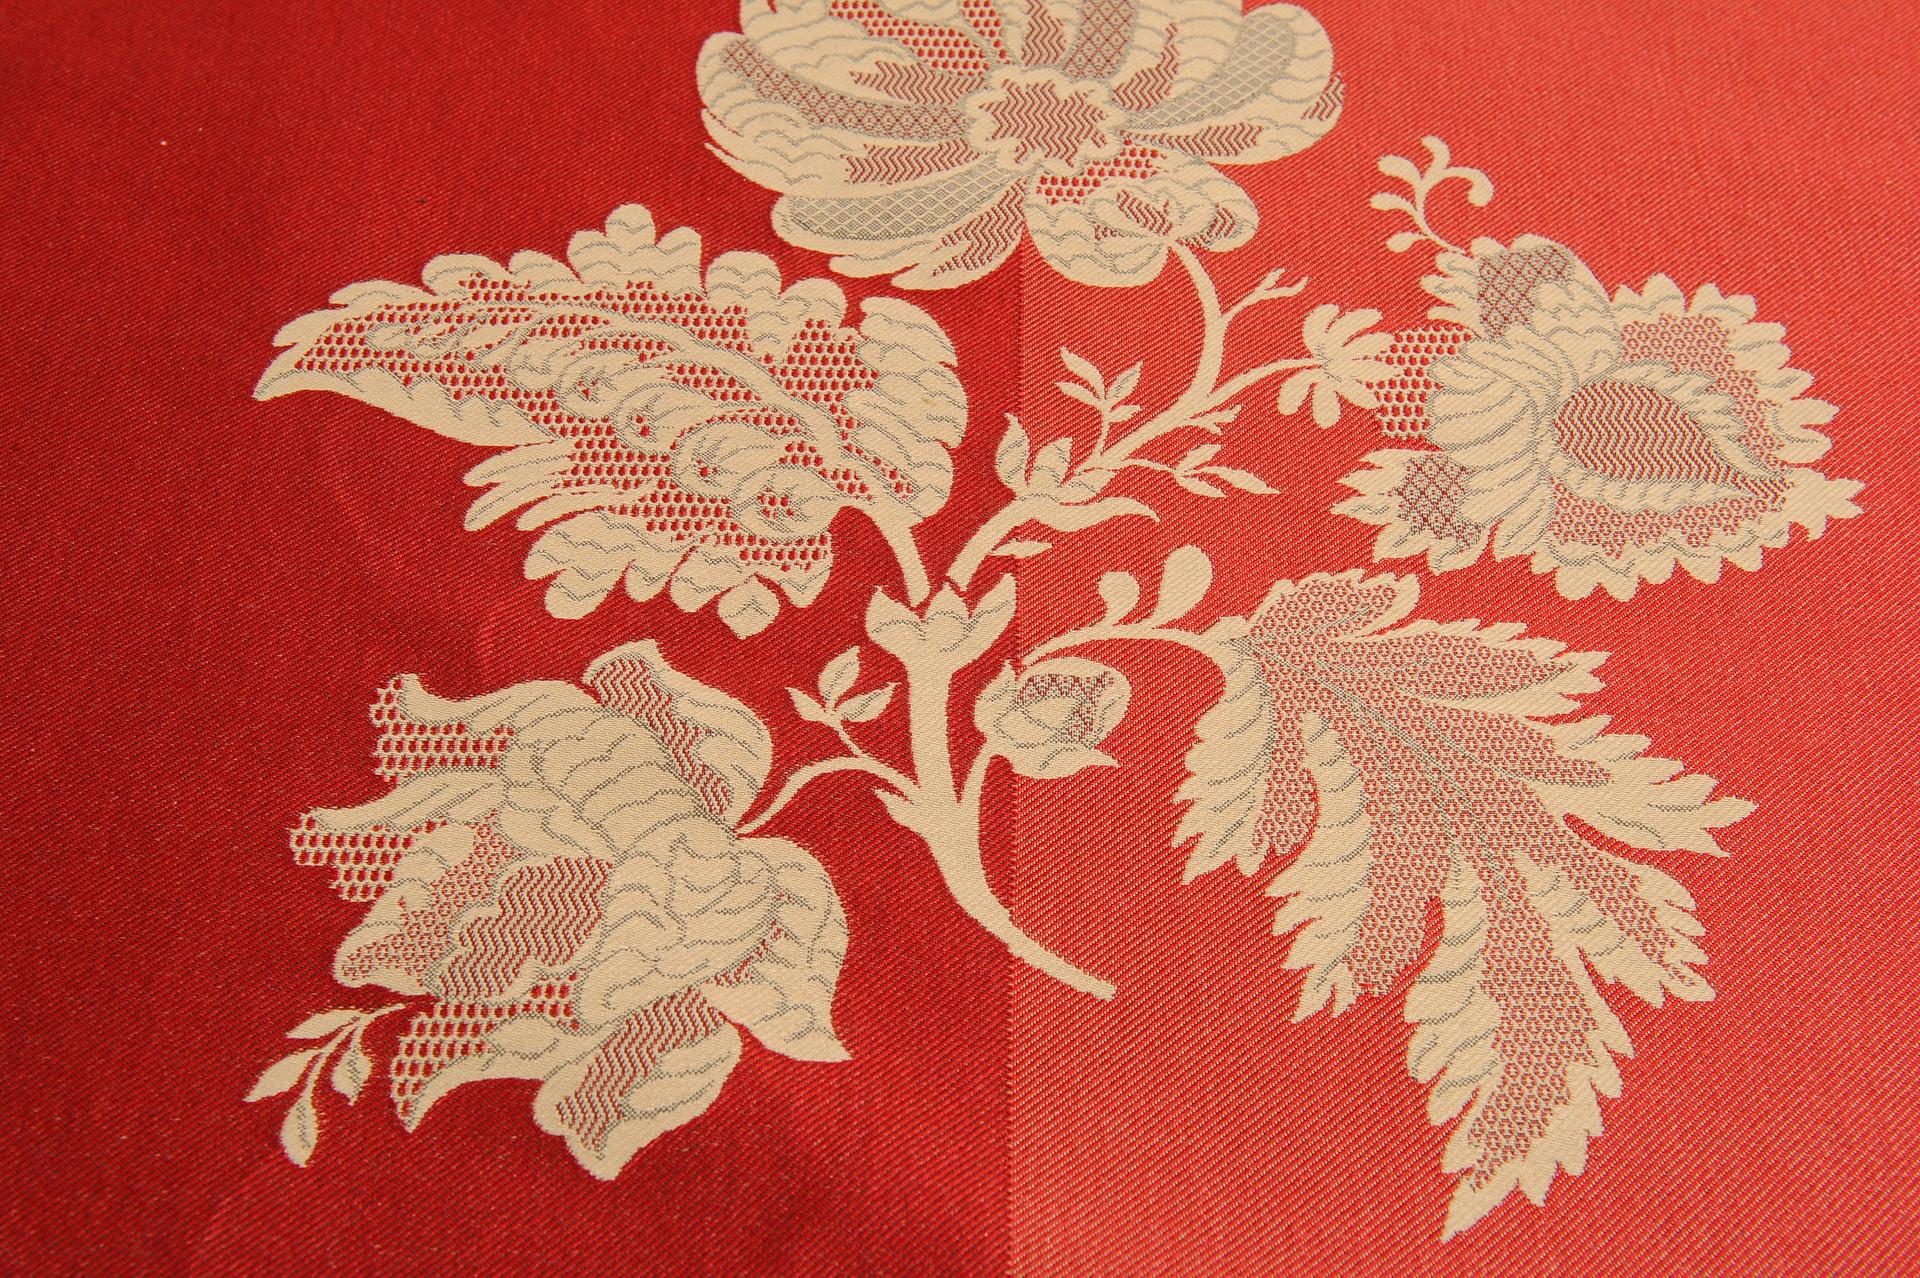 Textile Fabric Cut Mulberry Lace Damask: Make an OFFER In Excellent Condition For Sale In Alessandria, Piemonte